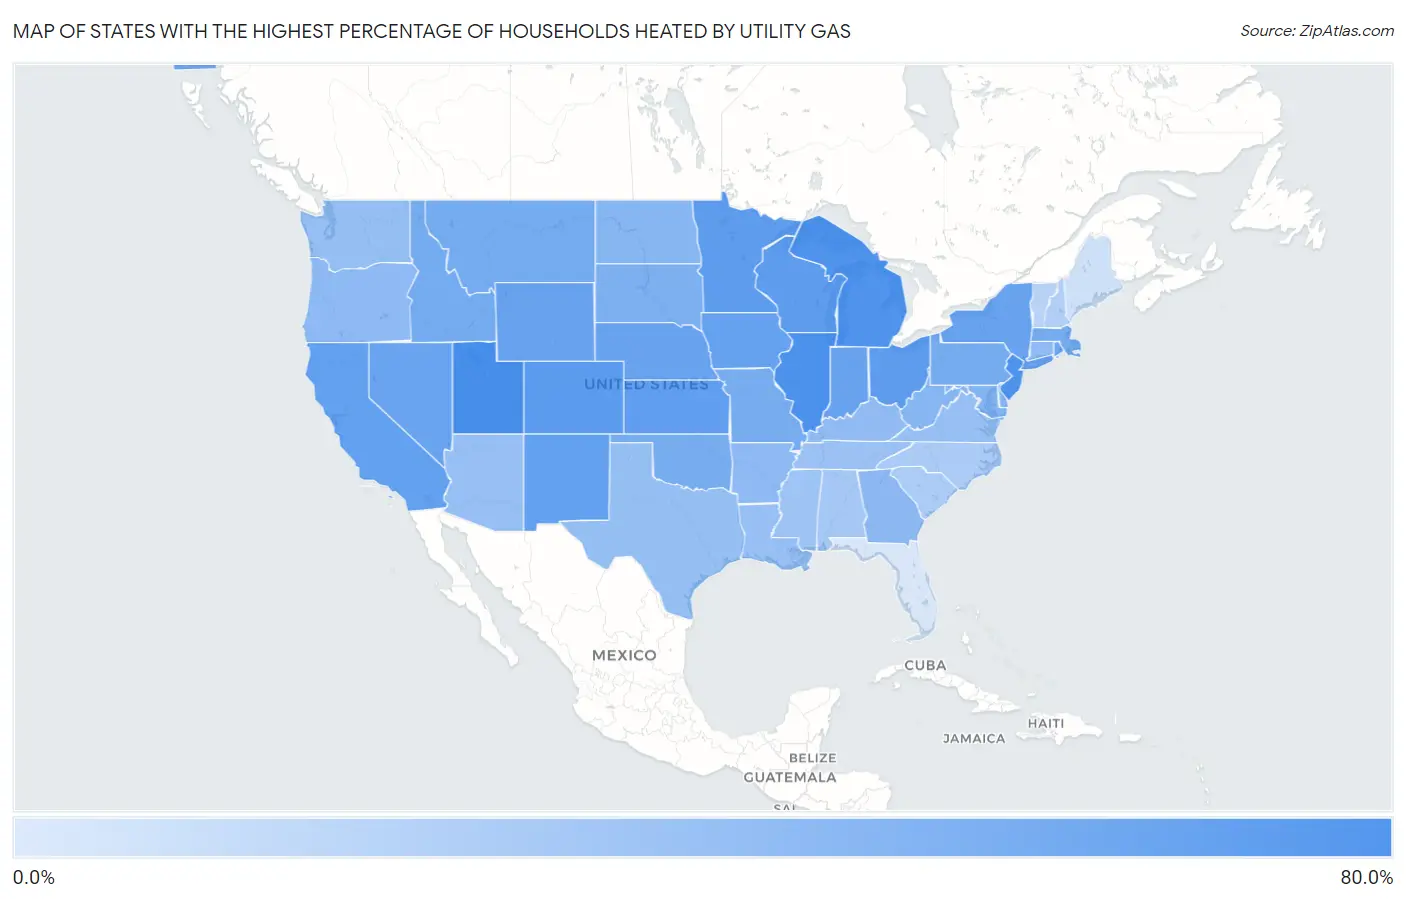 States with the Highest Percentage of Households Heated by Utility Gas in the United States Map